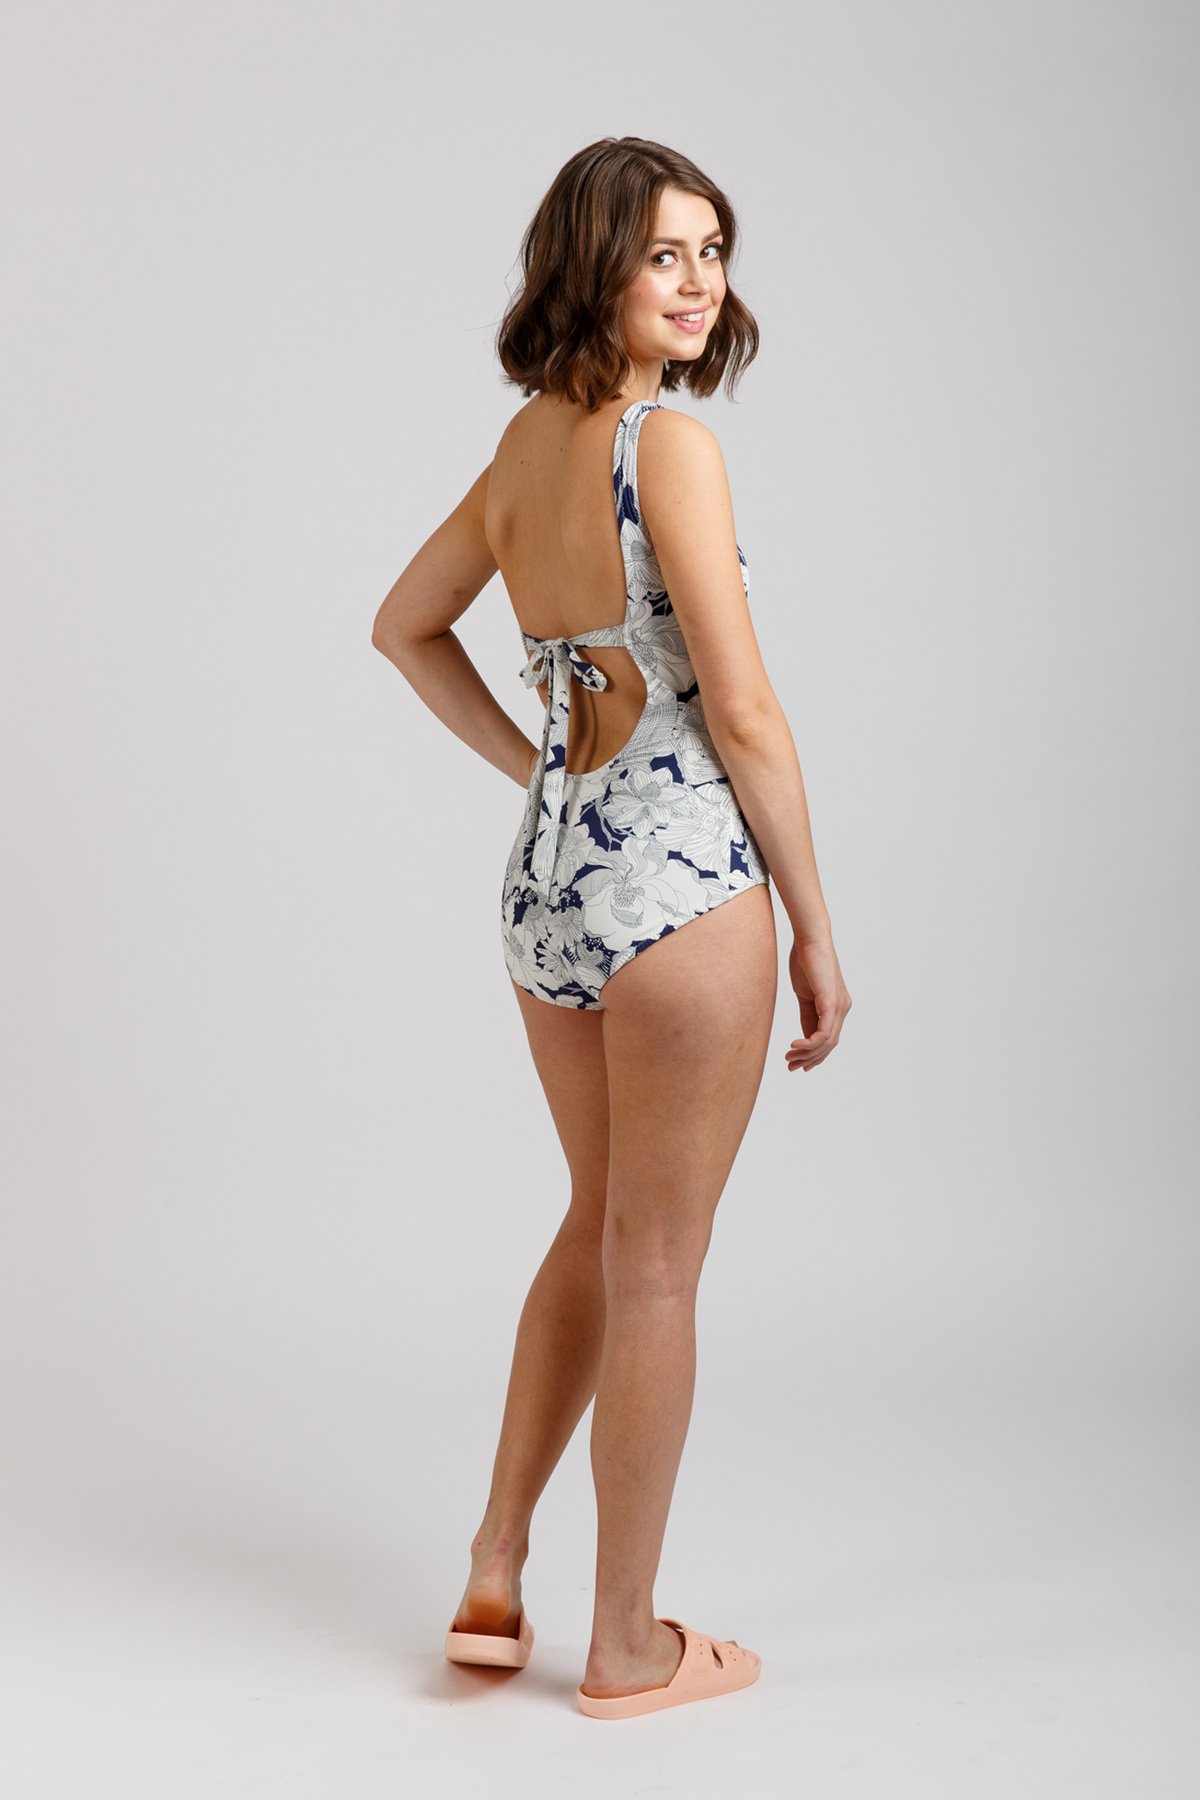 It's here! The Ipswich Swimsuit sewing pattern with underwired bra